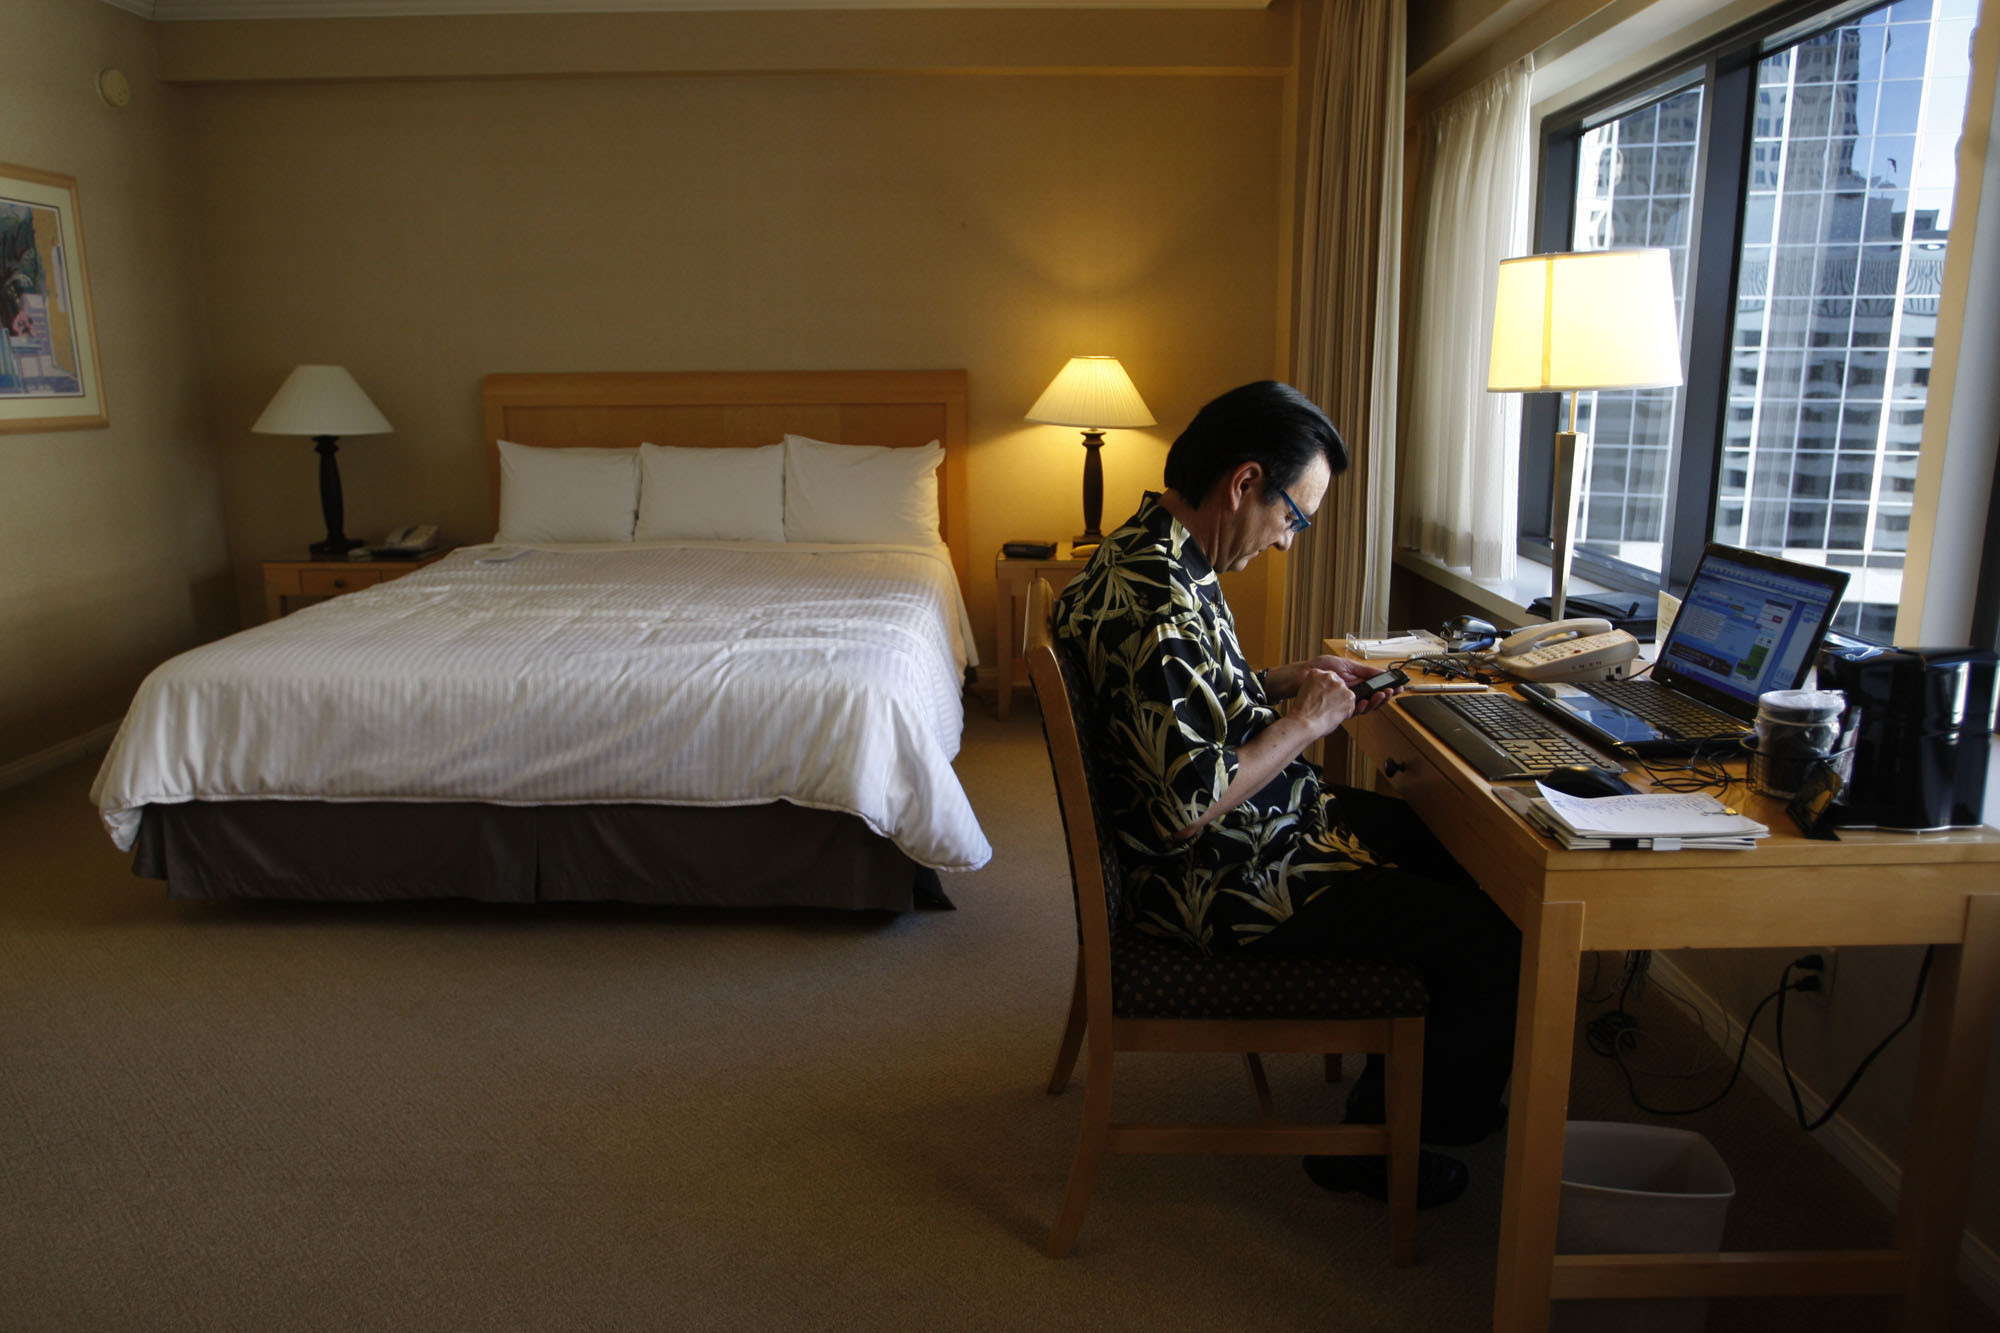 U.S. ranks low in quality WiFi at hotels